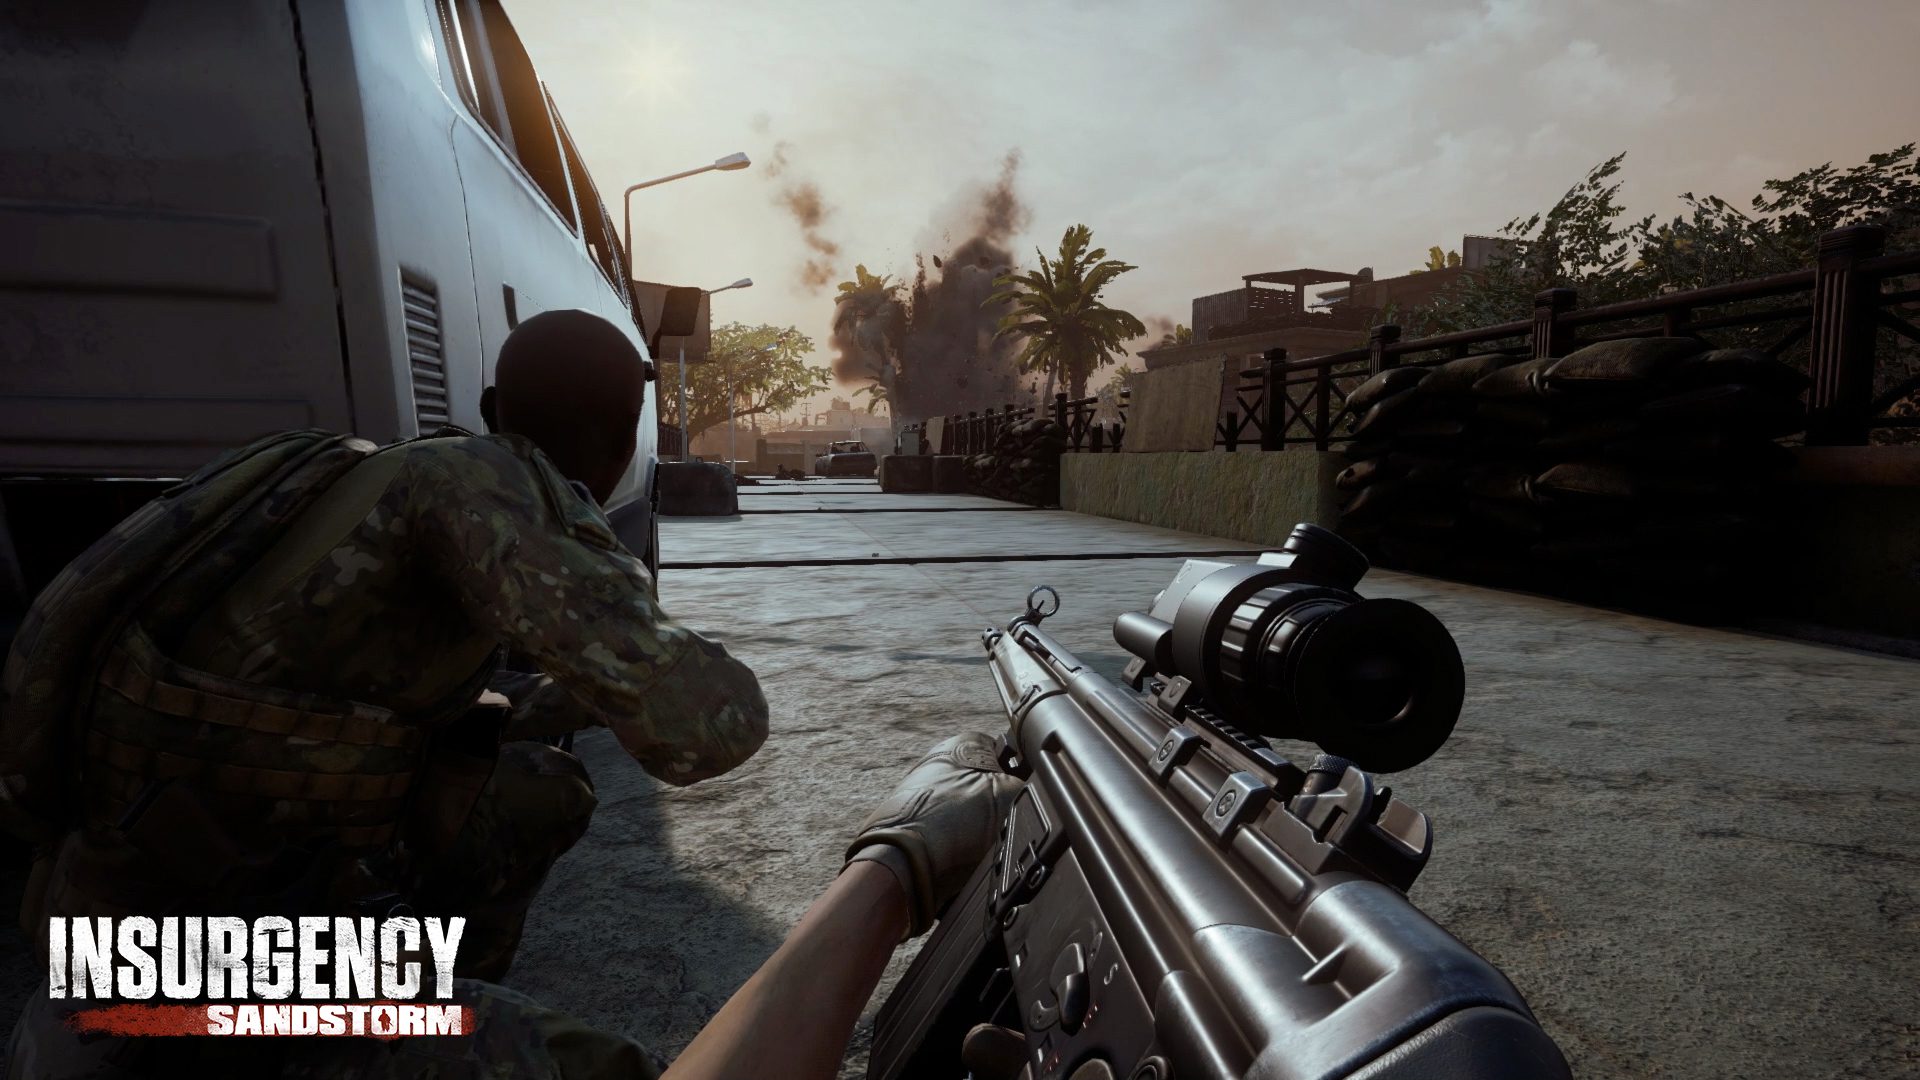 Insurgency: Sandstorm pre-order Beta extended ahead of December 12th launch